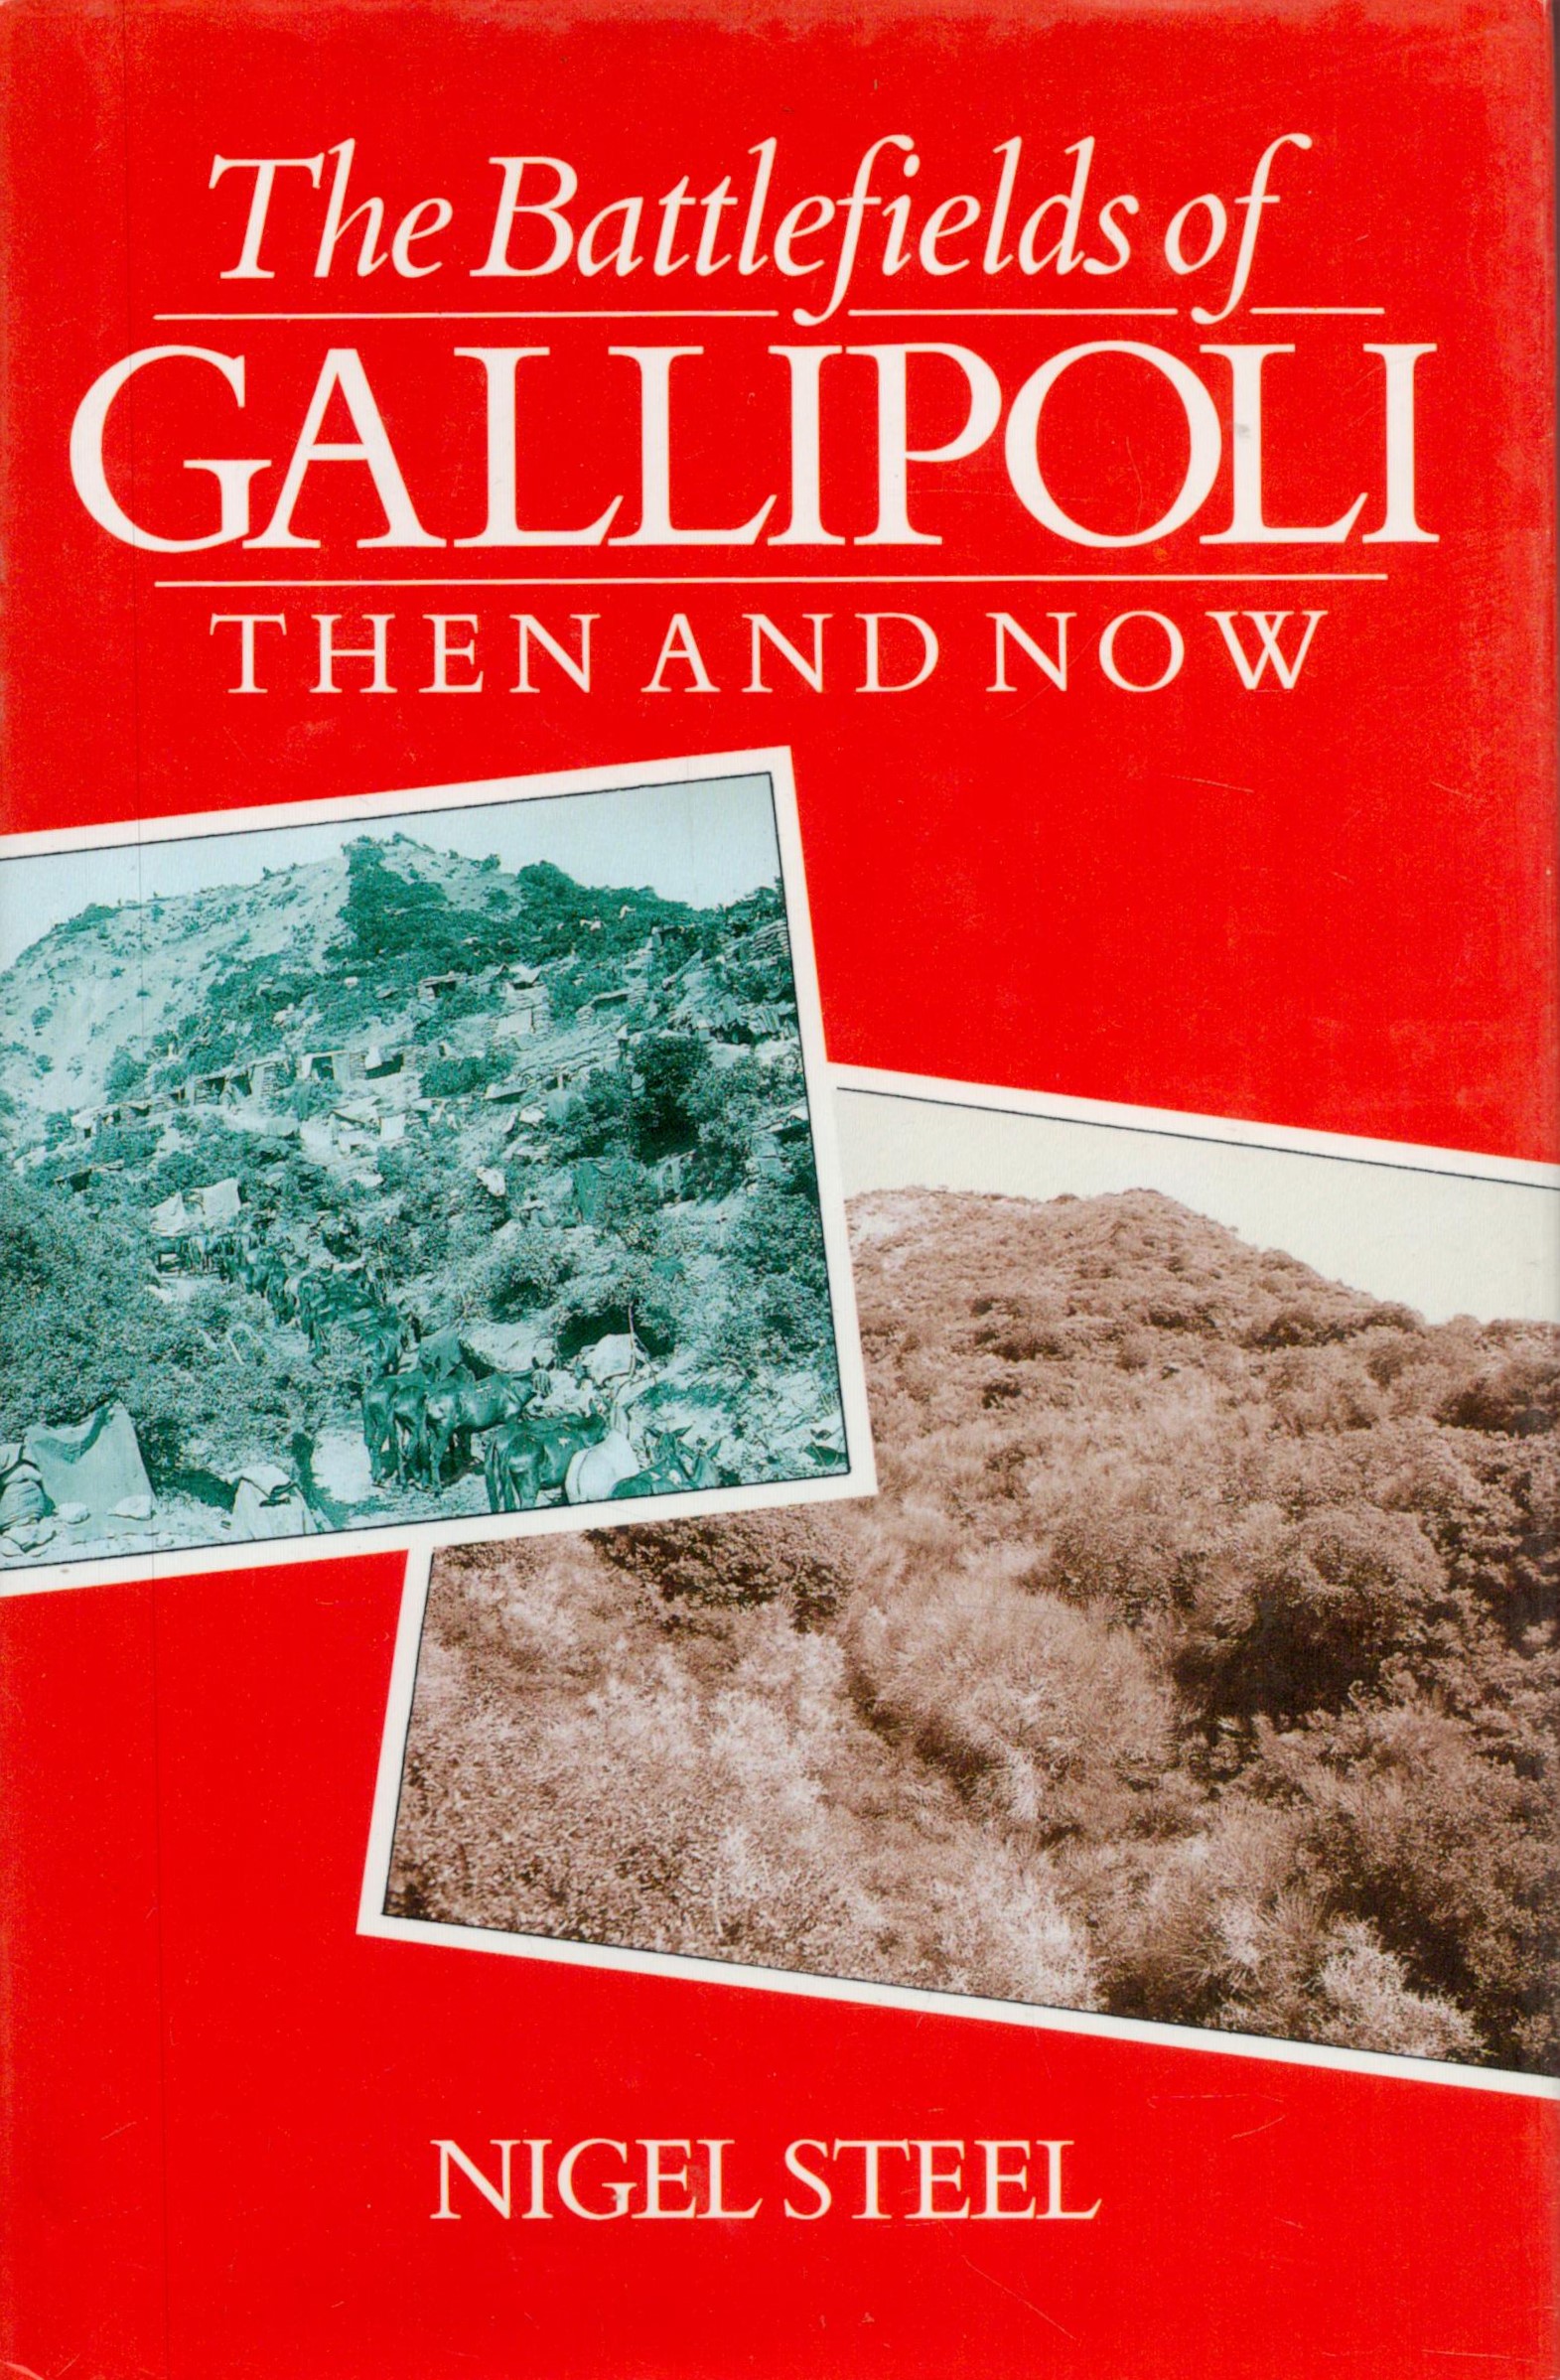 The Battlefields of Gallipoli Then and Now by Nigel Steel 1990 First Edition Hardback Book with